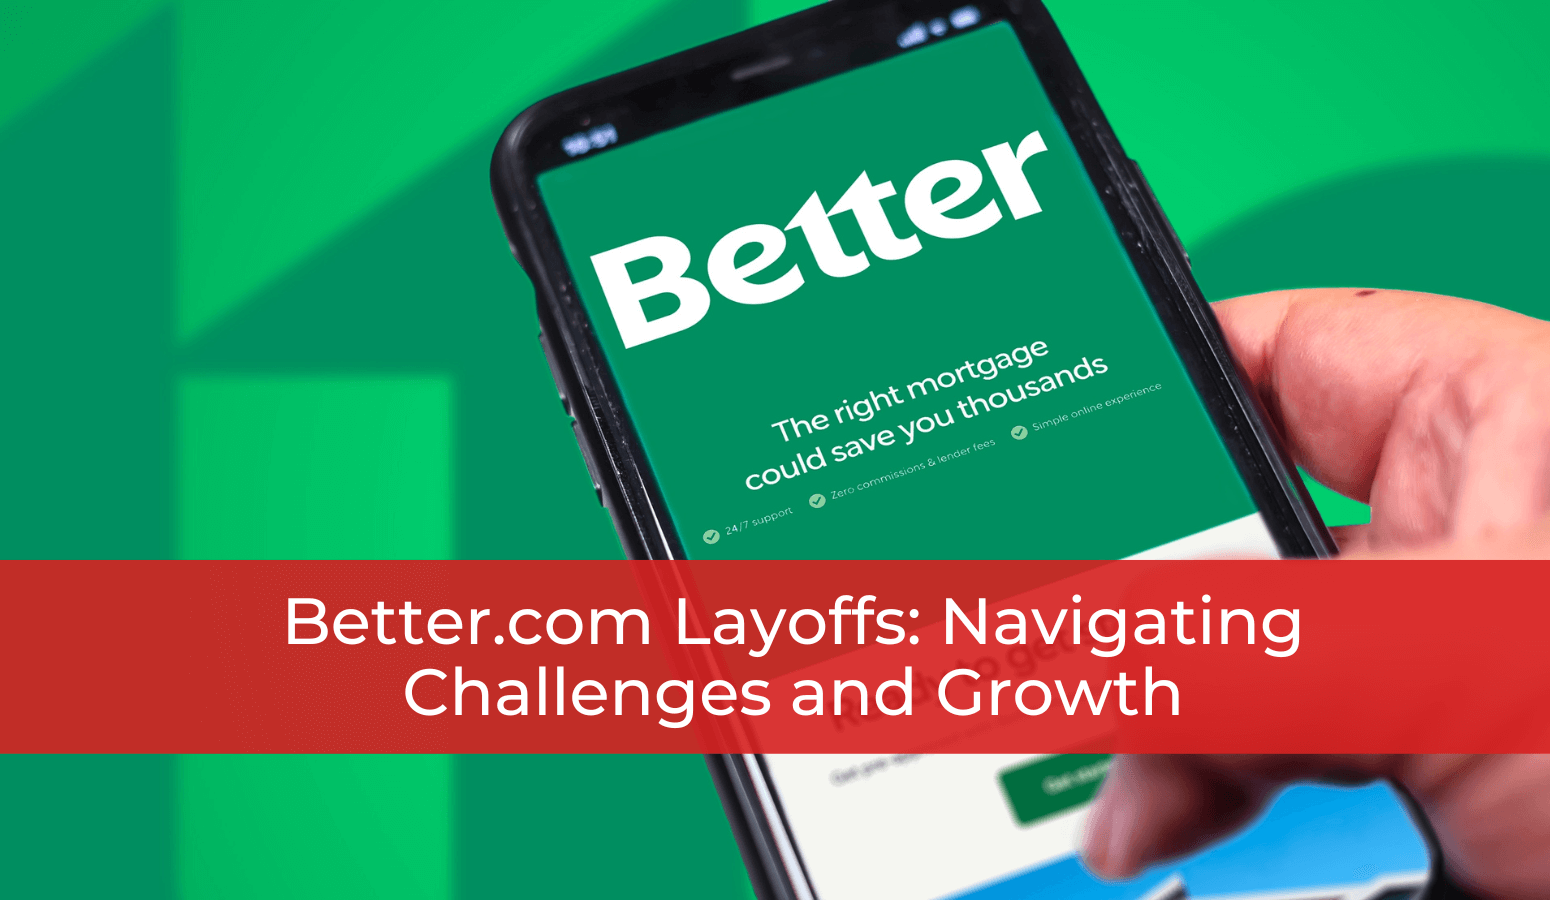 Featured image for “Better.com Layoffs: Navigating Challenges and Growth”